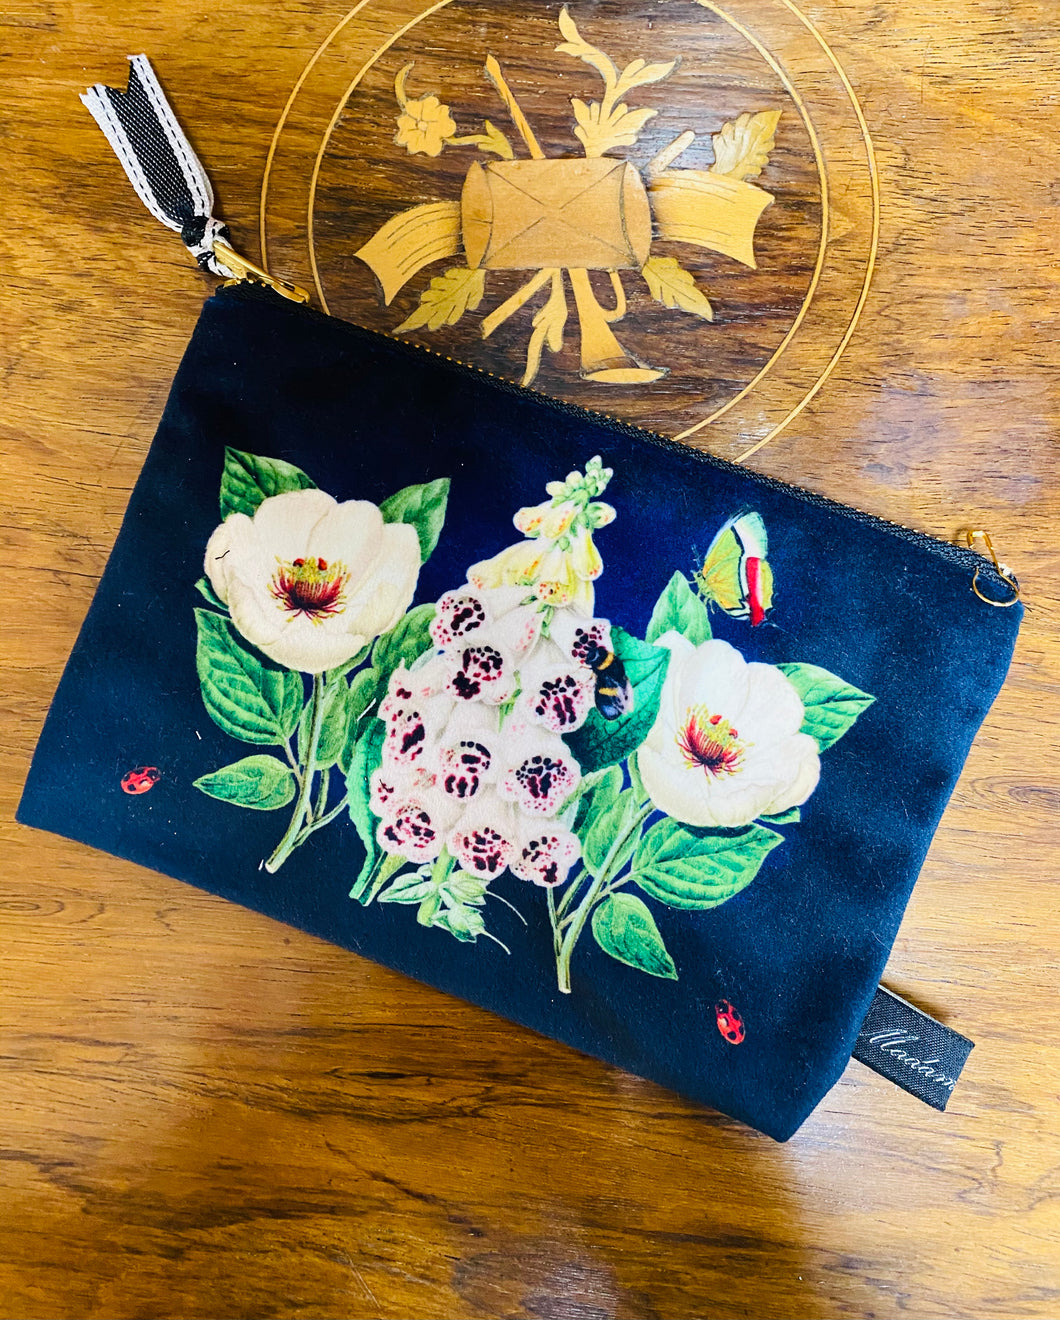 Pwrs Melfed Glas Tywyll Blodeuog Madame Treacle / Madame Treacle Navy Velvet Floral Purse